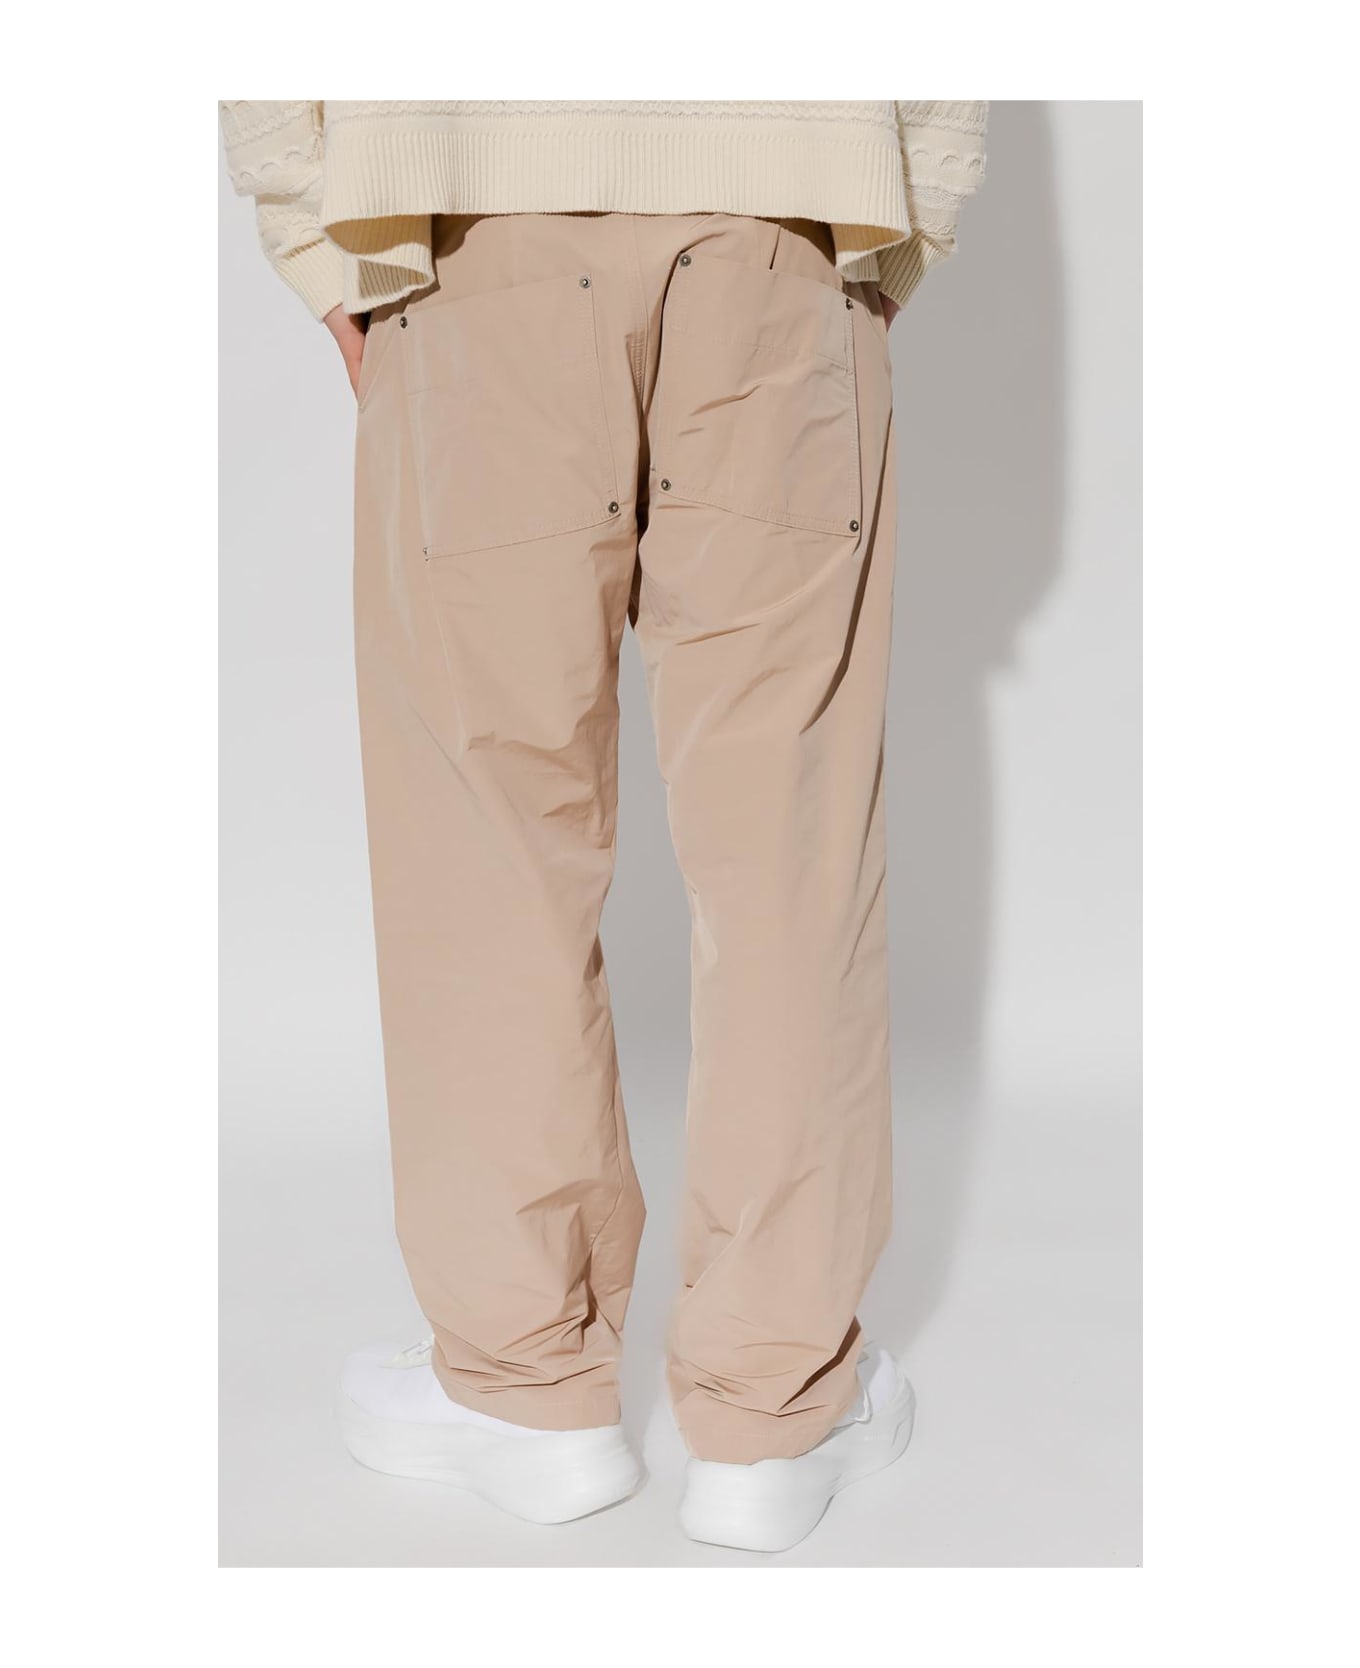 FourTwoFour on Fairfax Trousers With Pockets - Beige